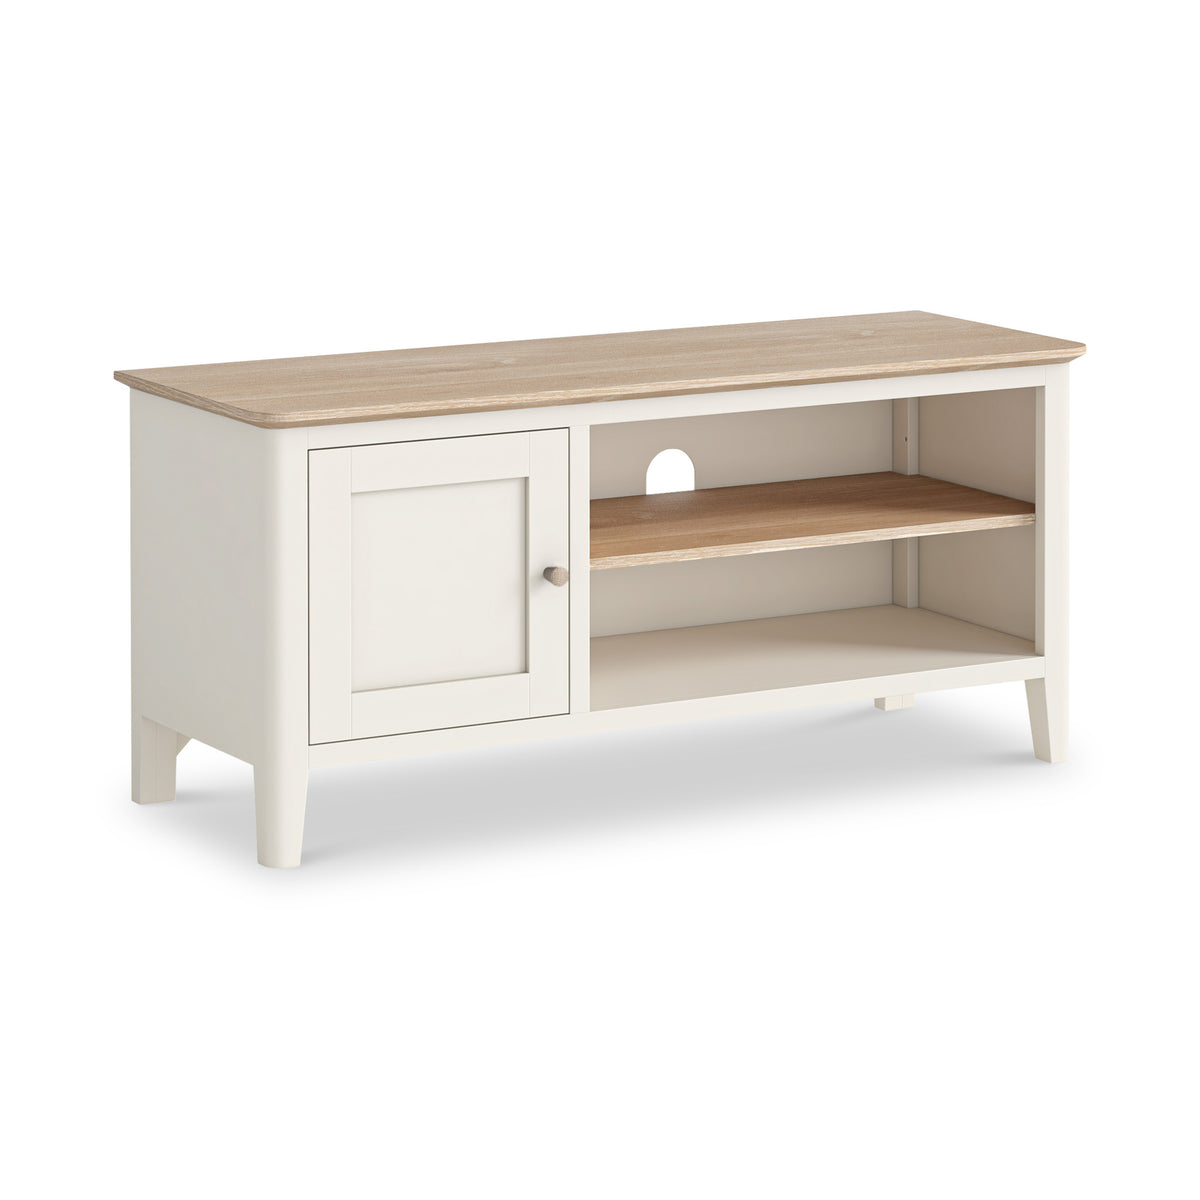 Penrose Coconut White 110cm TV Unit with wooden handles from Roseland Furniture